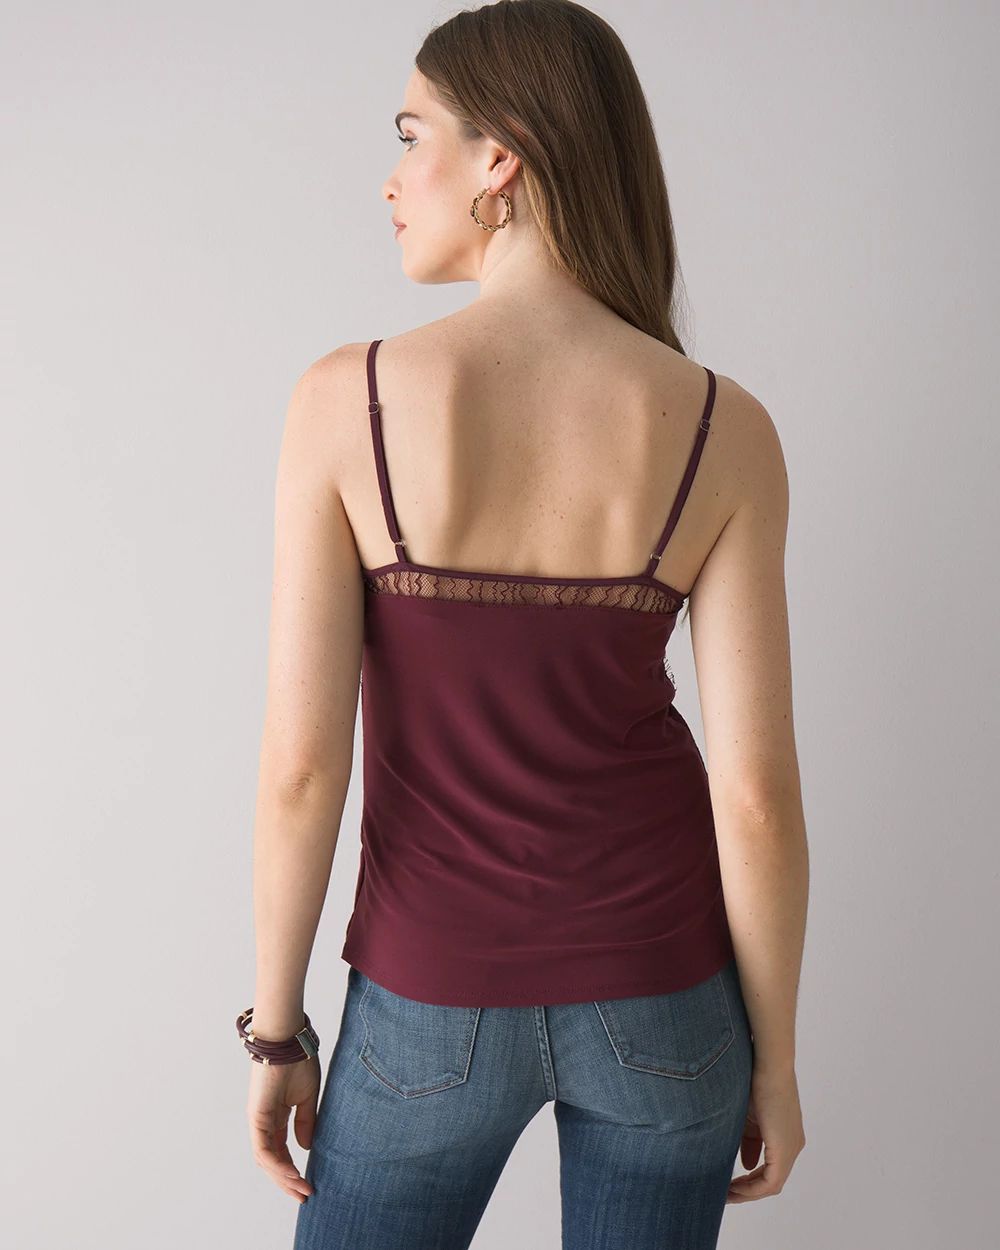 Matte Jersey Knit Lace-Trim Camisole click to view larger image.